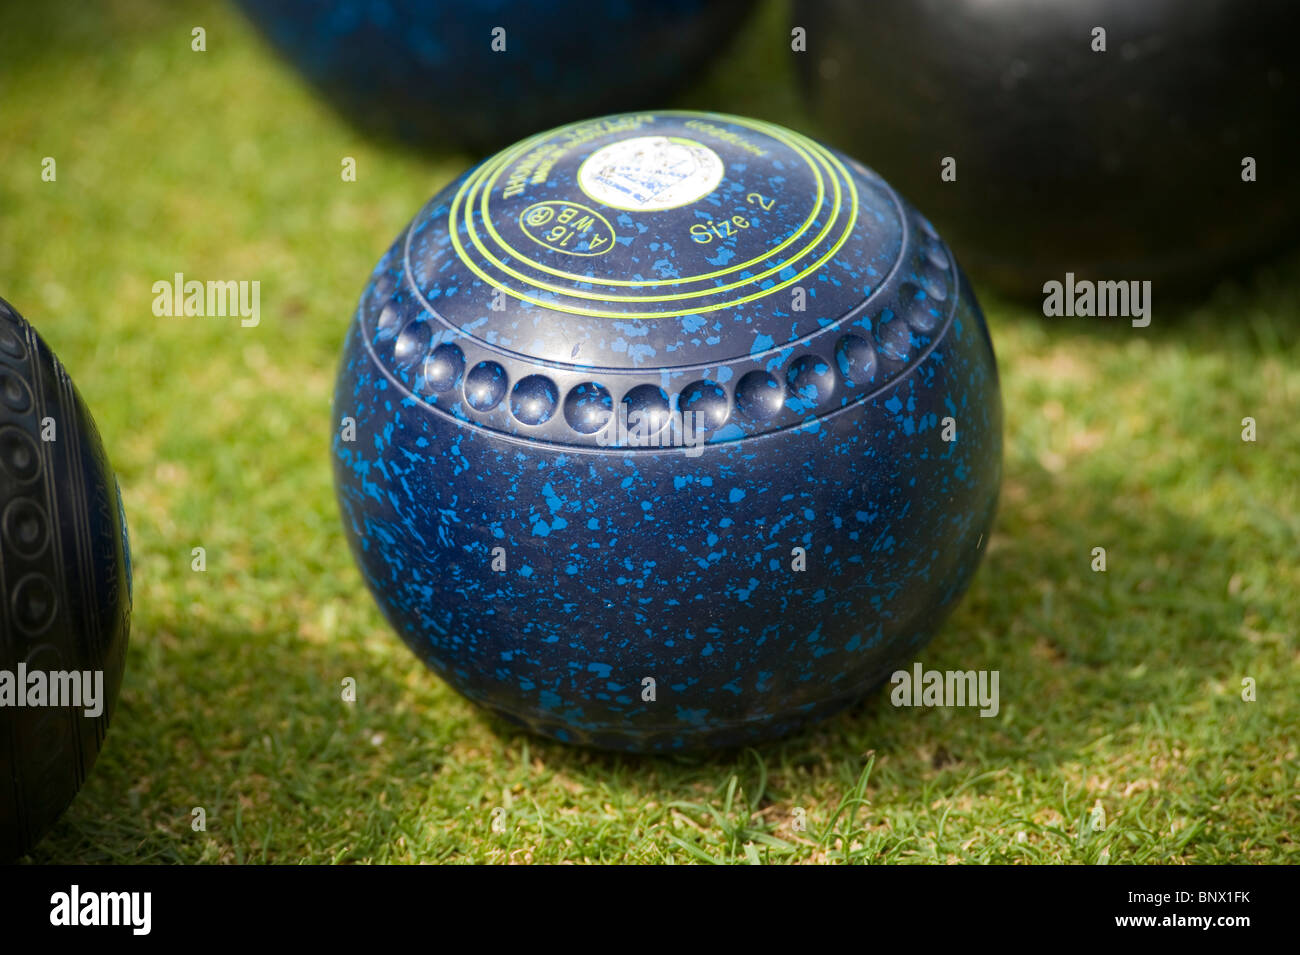 A bowl in a game of outdoor lawn bowls Stock Photo